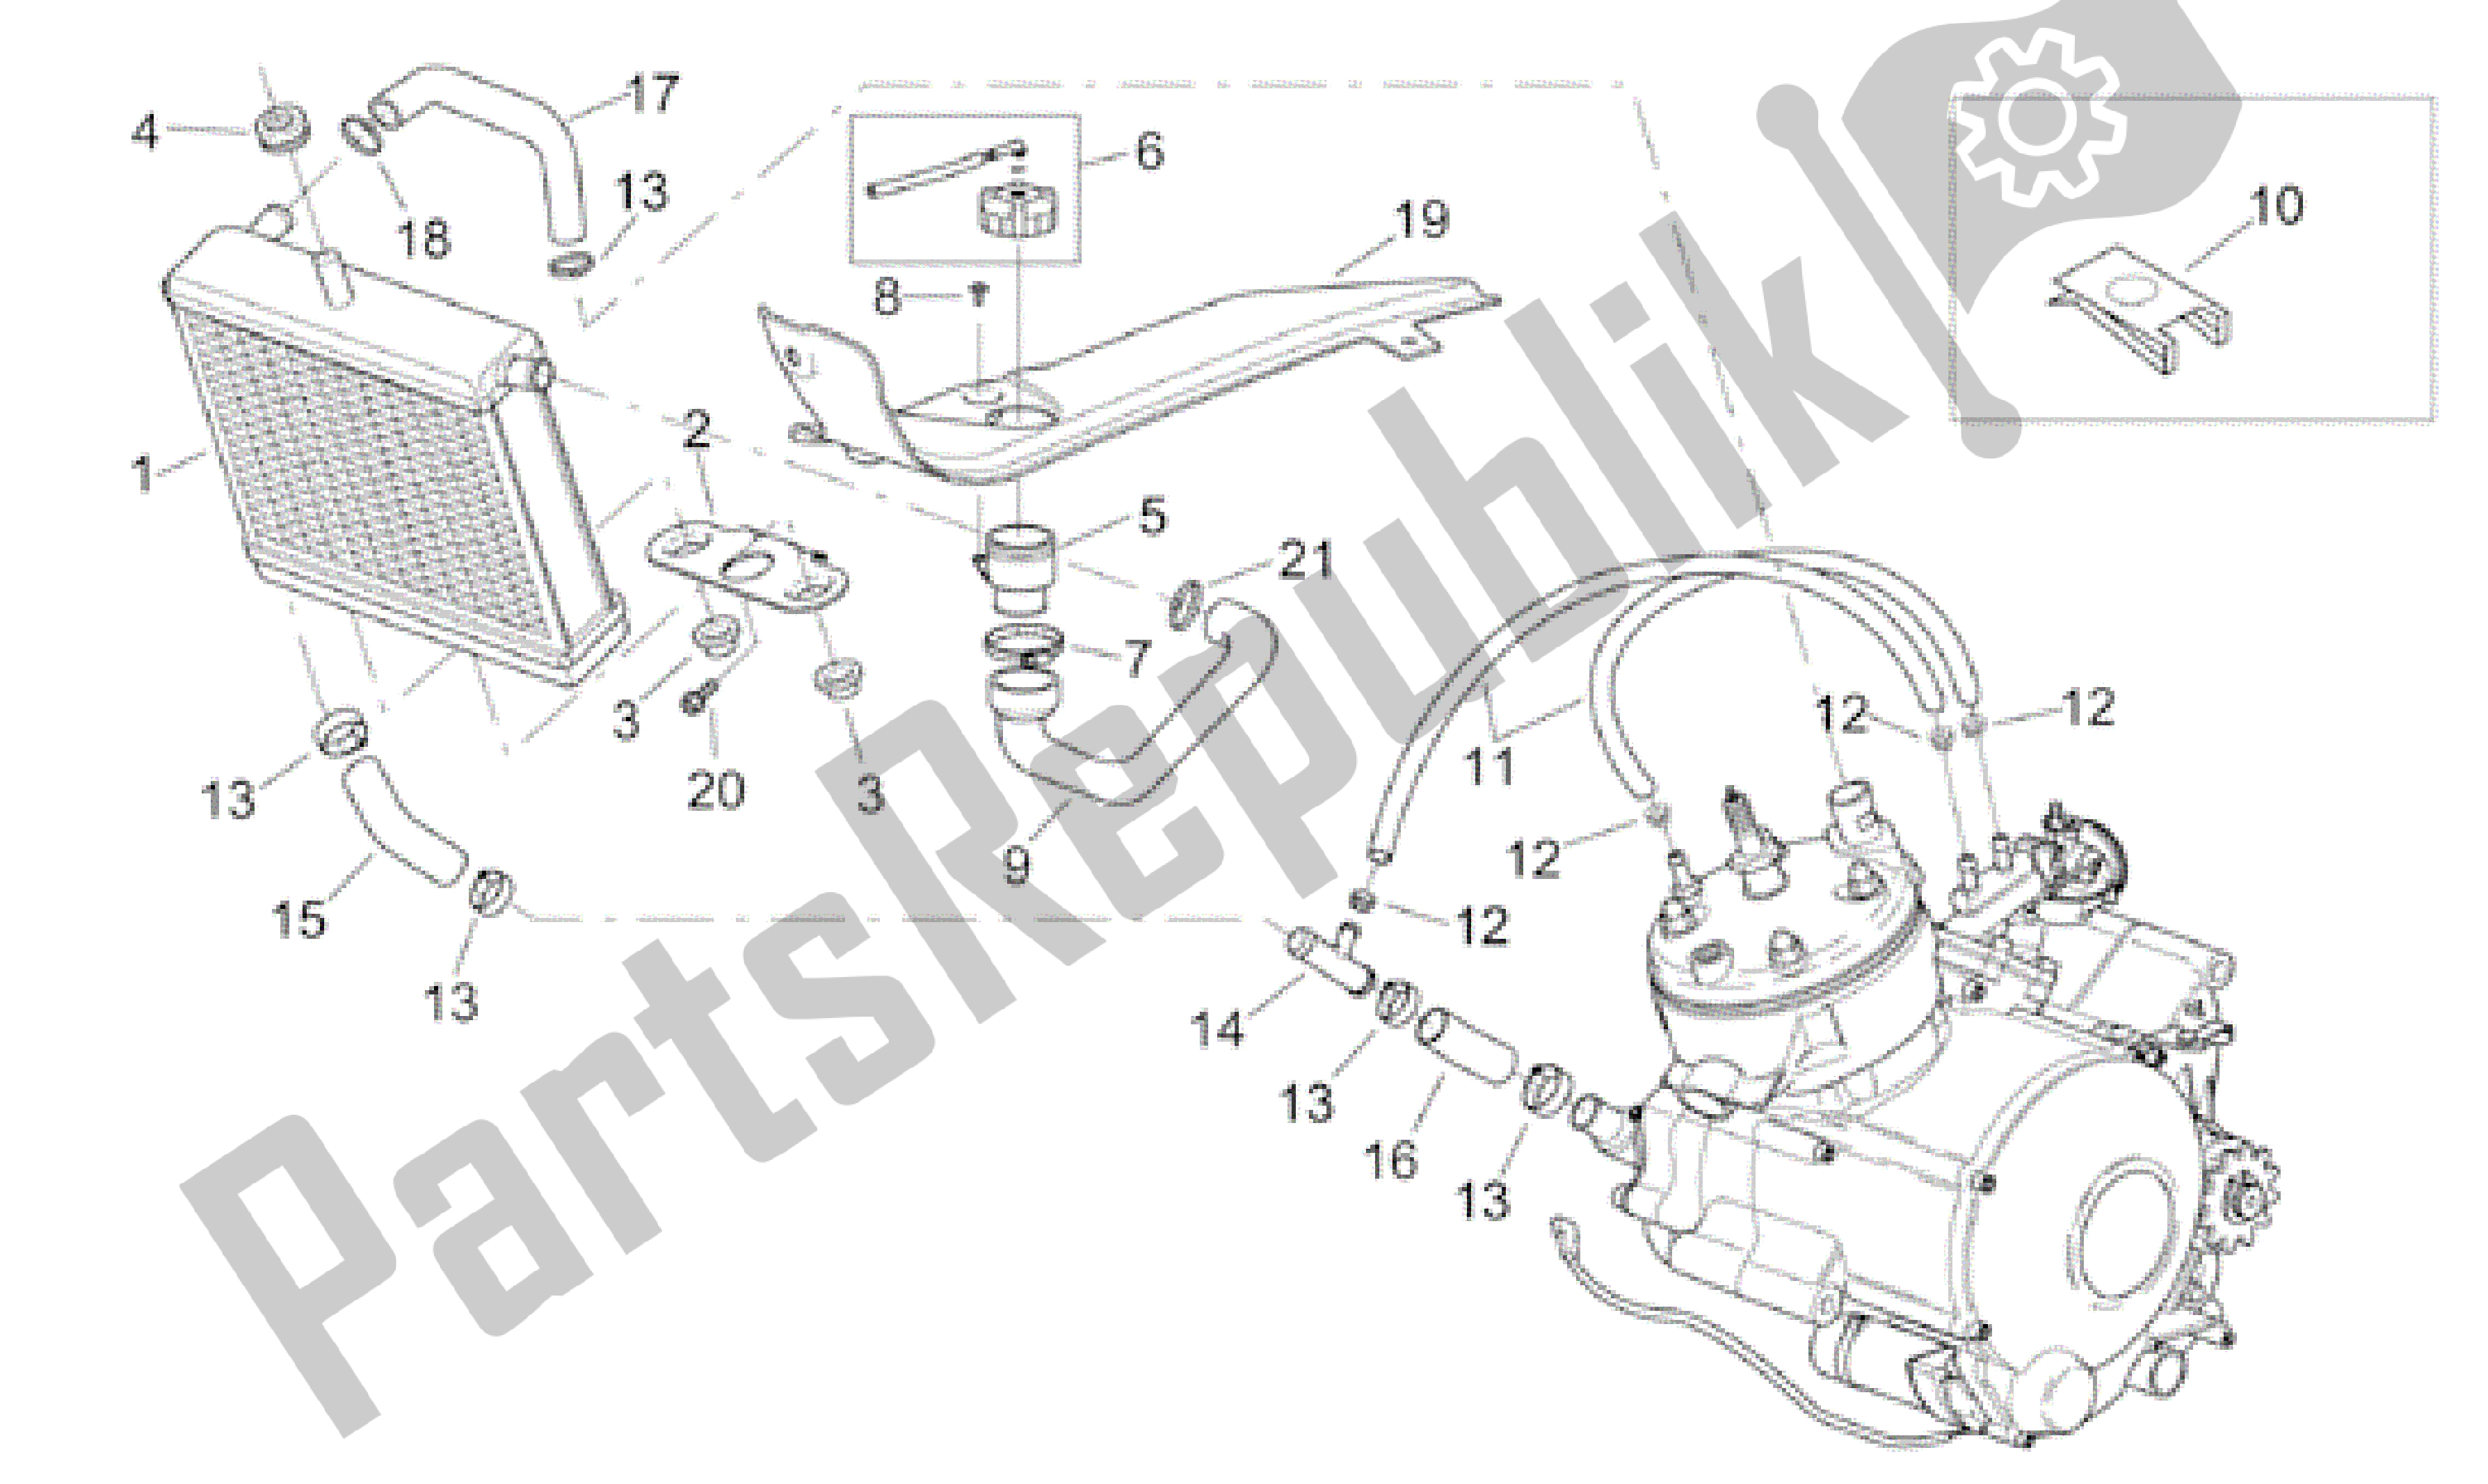 All parts for the Water Cooler of the Aprilia RS 50 1999 - 2005